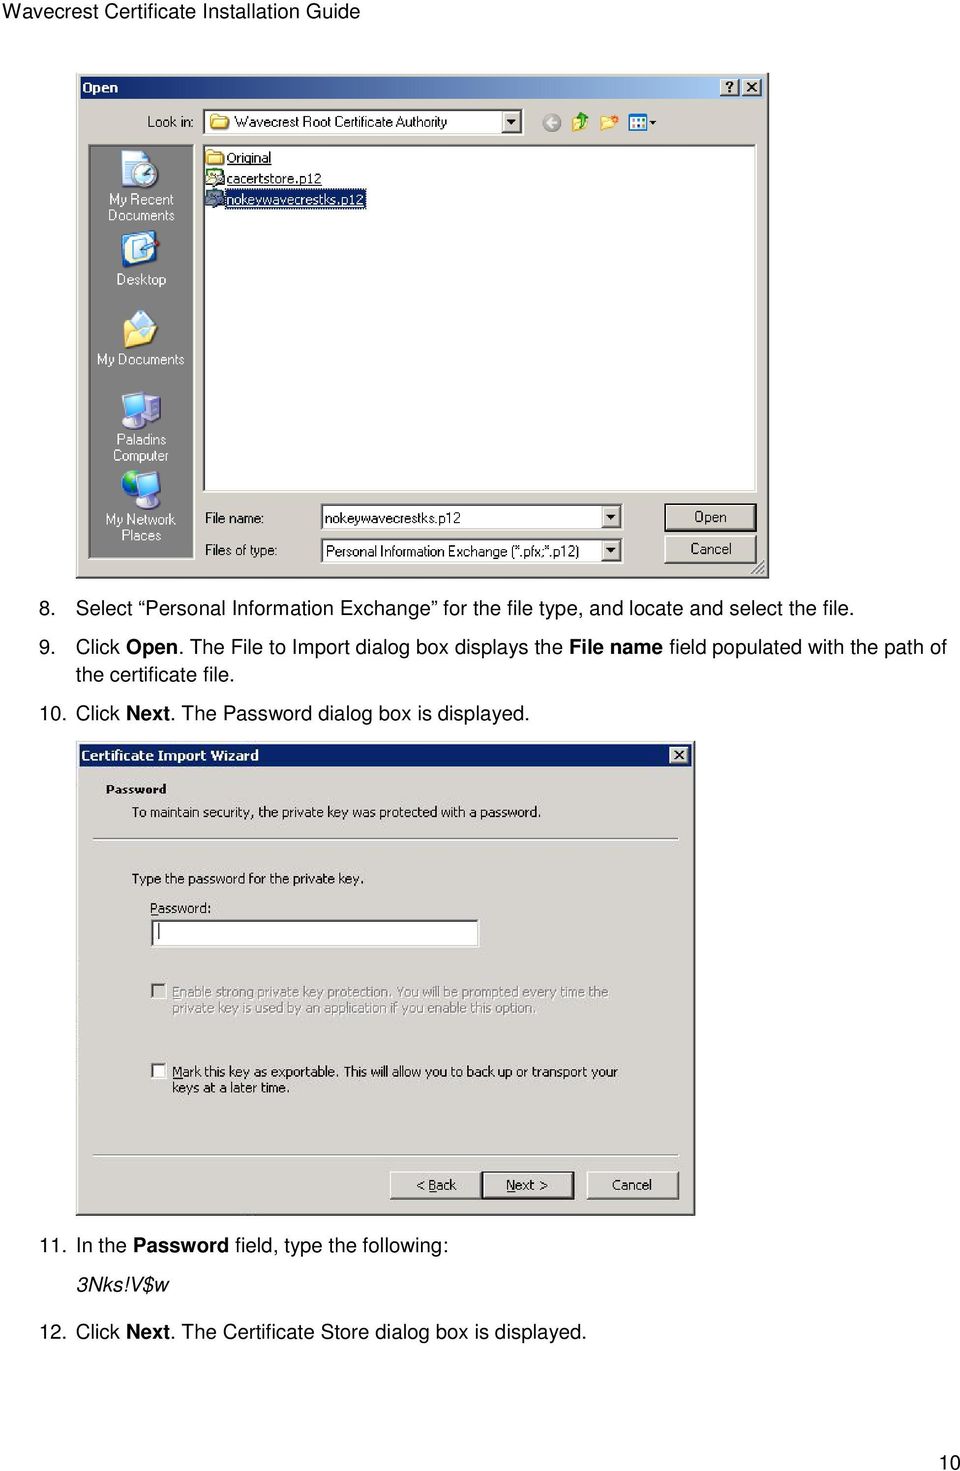 The File to Import dialog box displays the File name field populated with the path of the